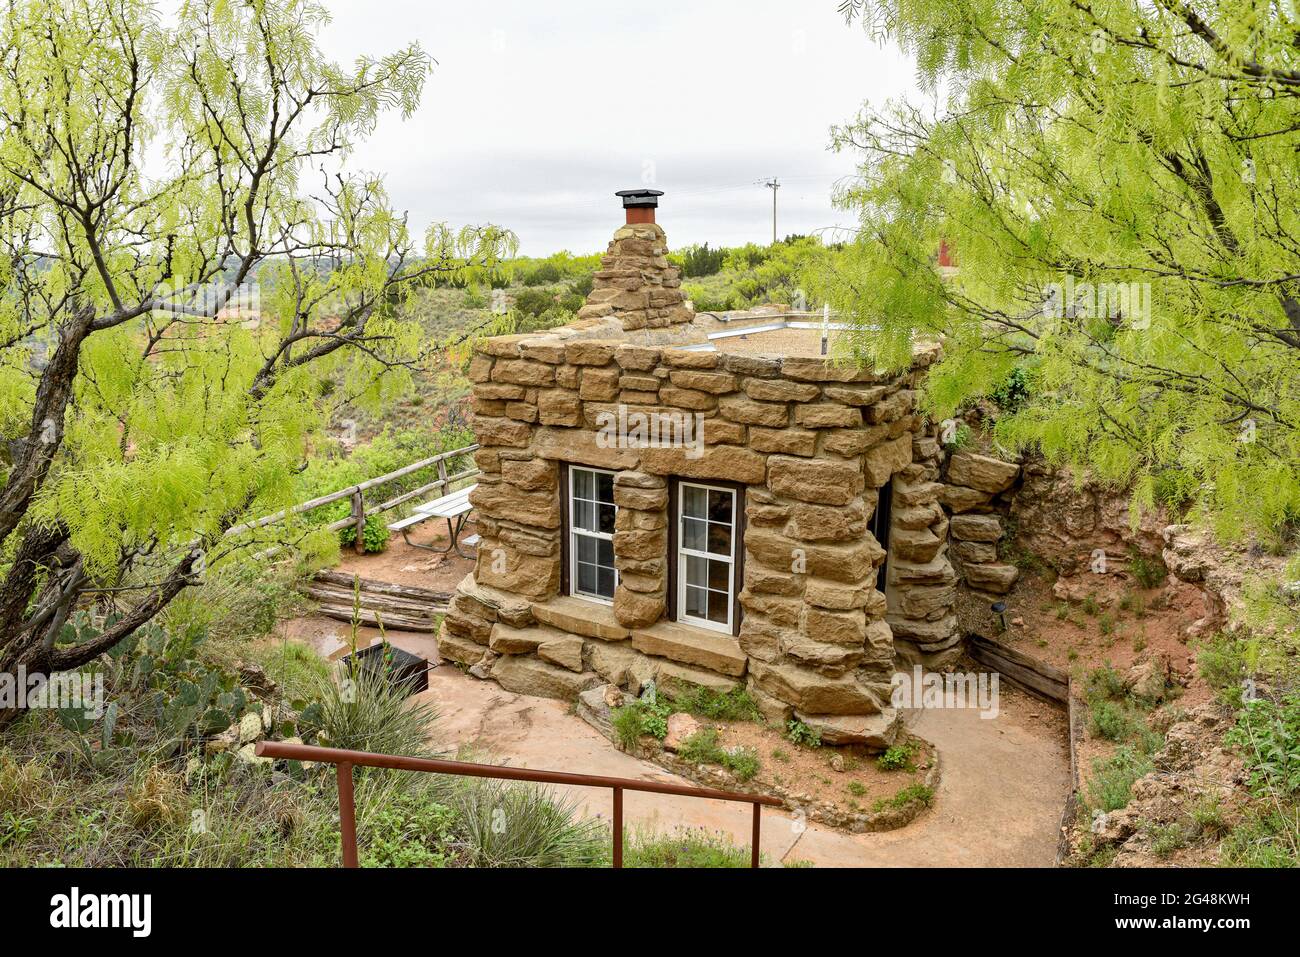 Cabina rustica Charles Goodnight al Palo duro Canyon state Park, Texas. Foto Stock